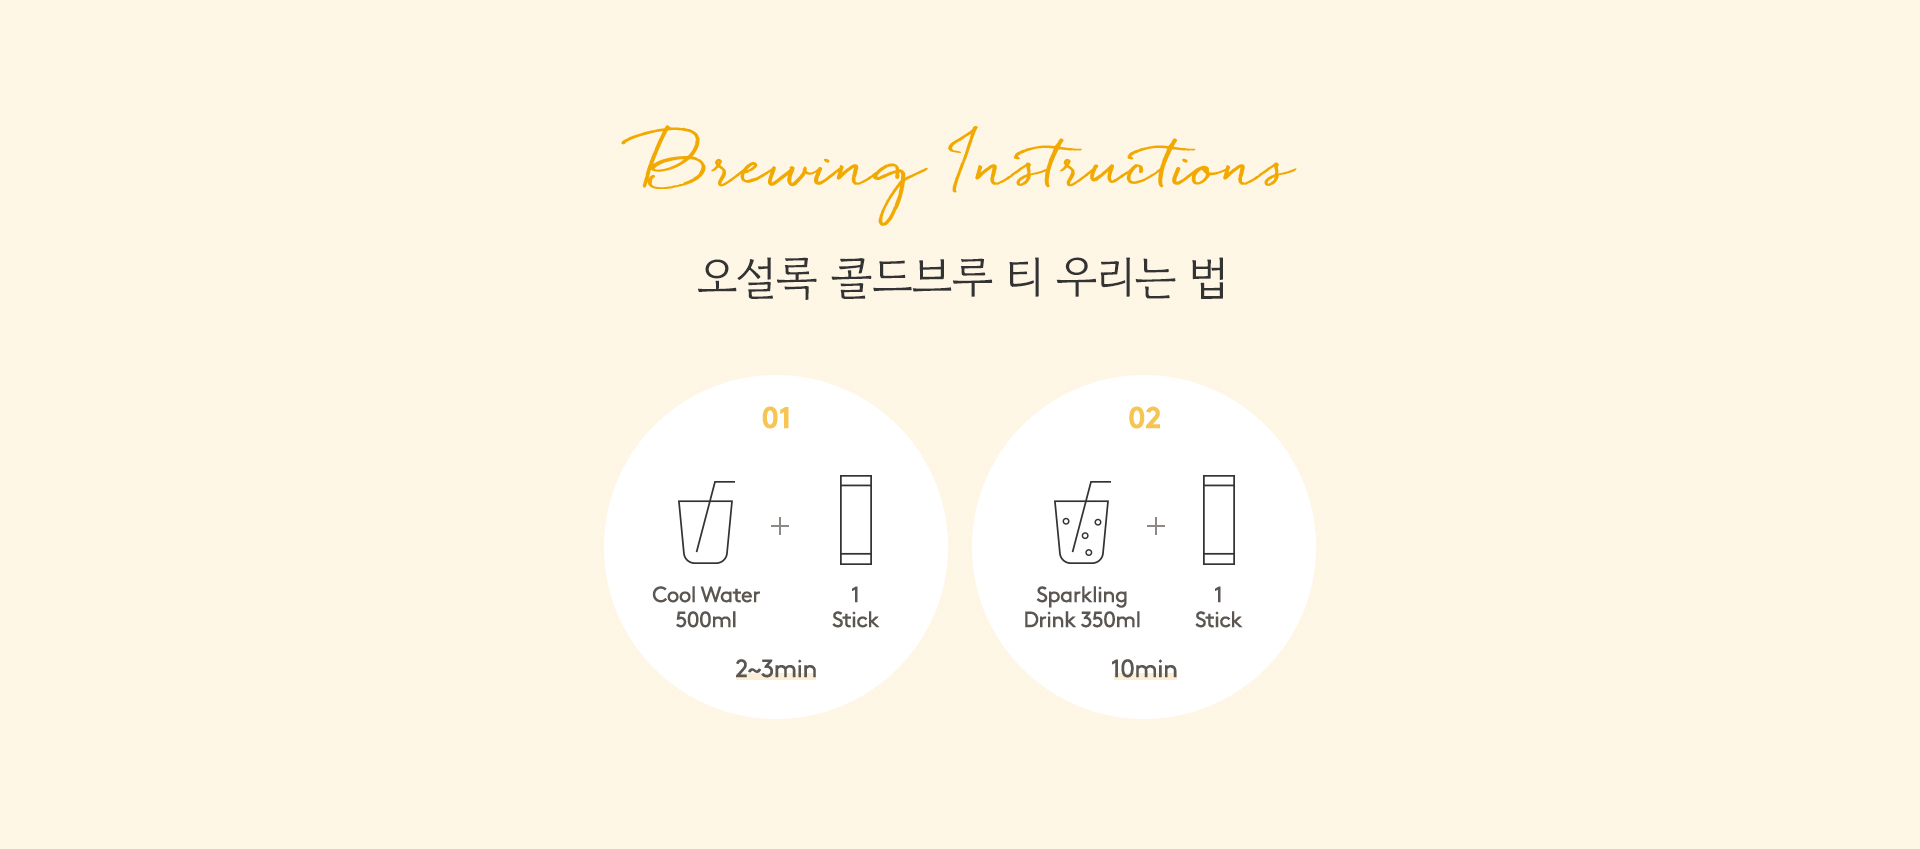 Brewing Instructions